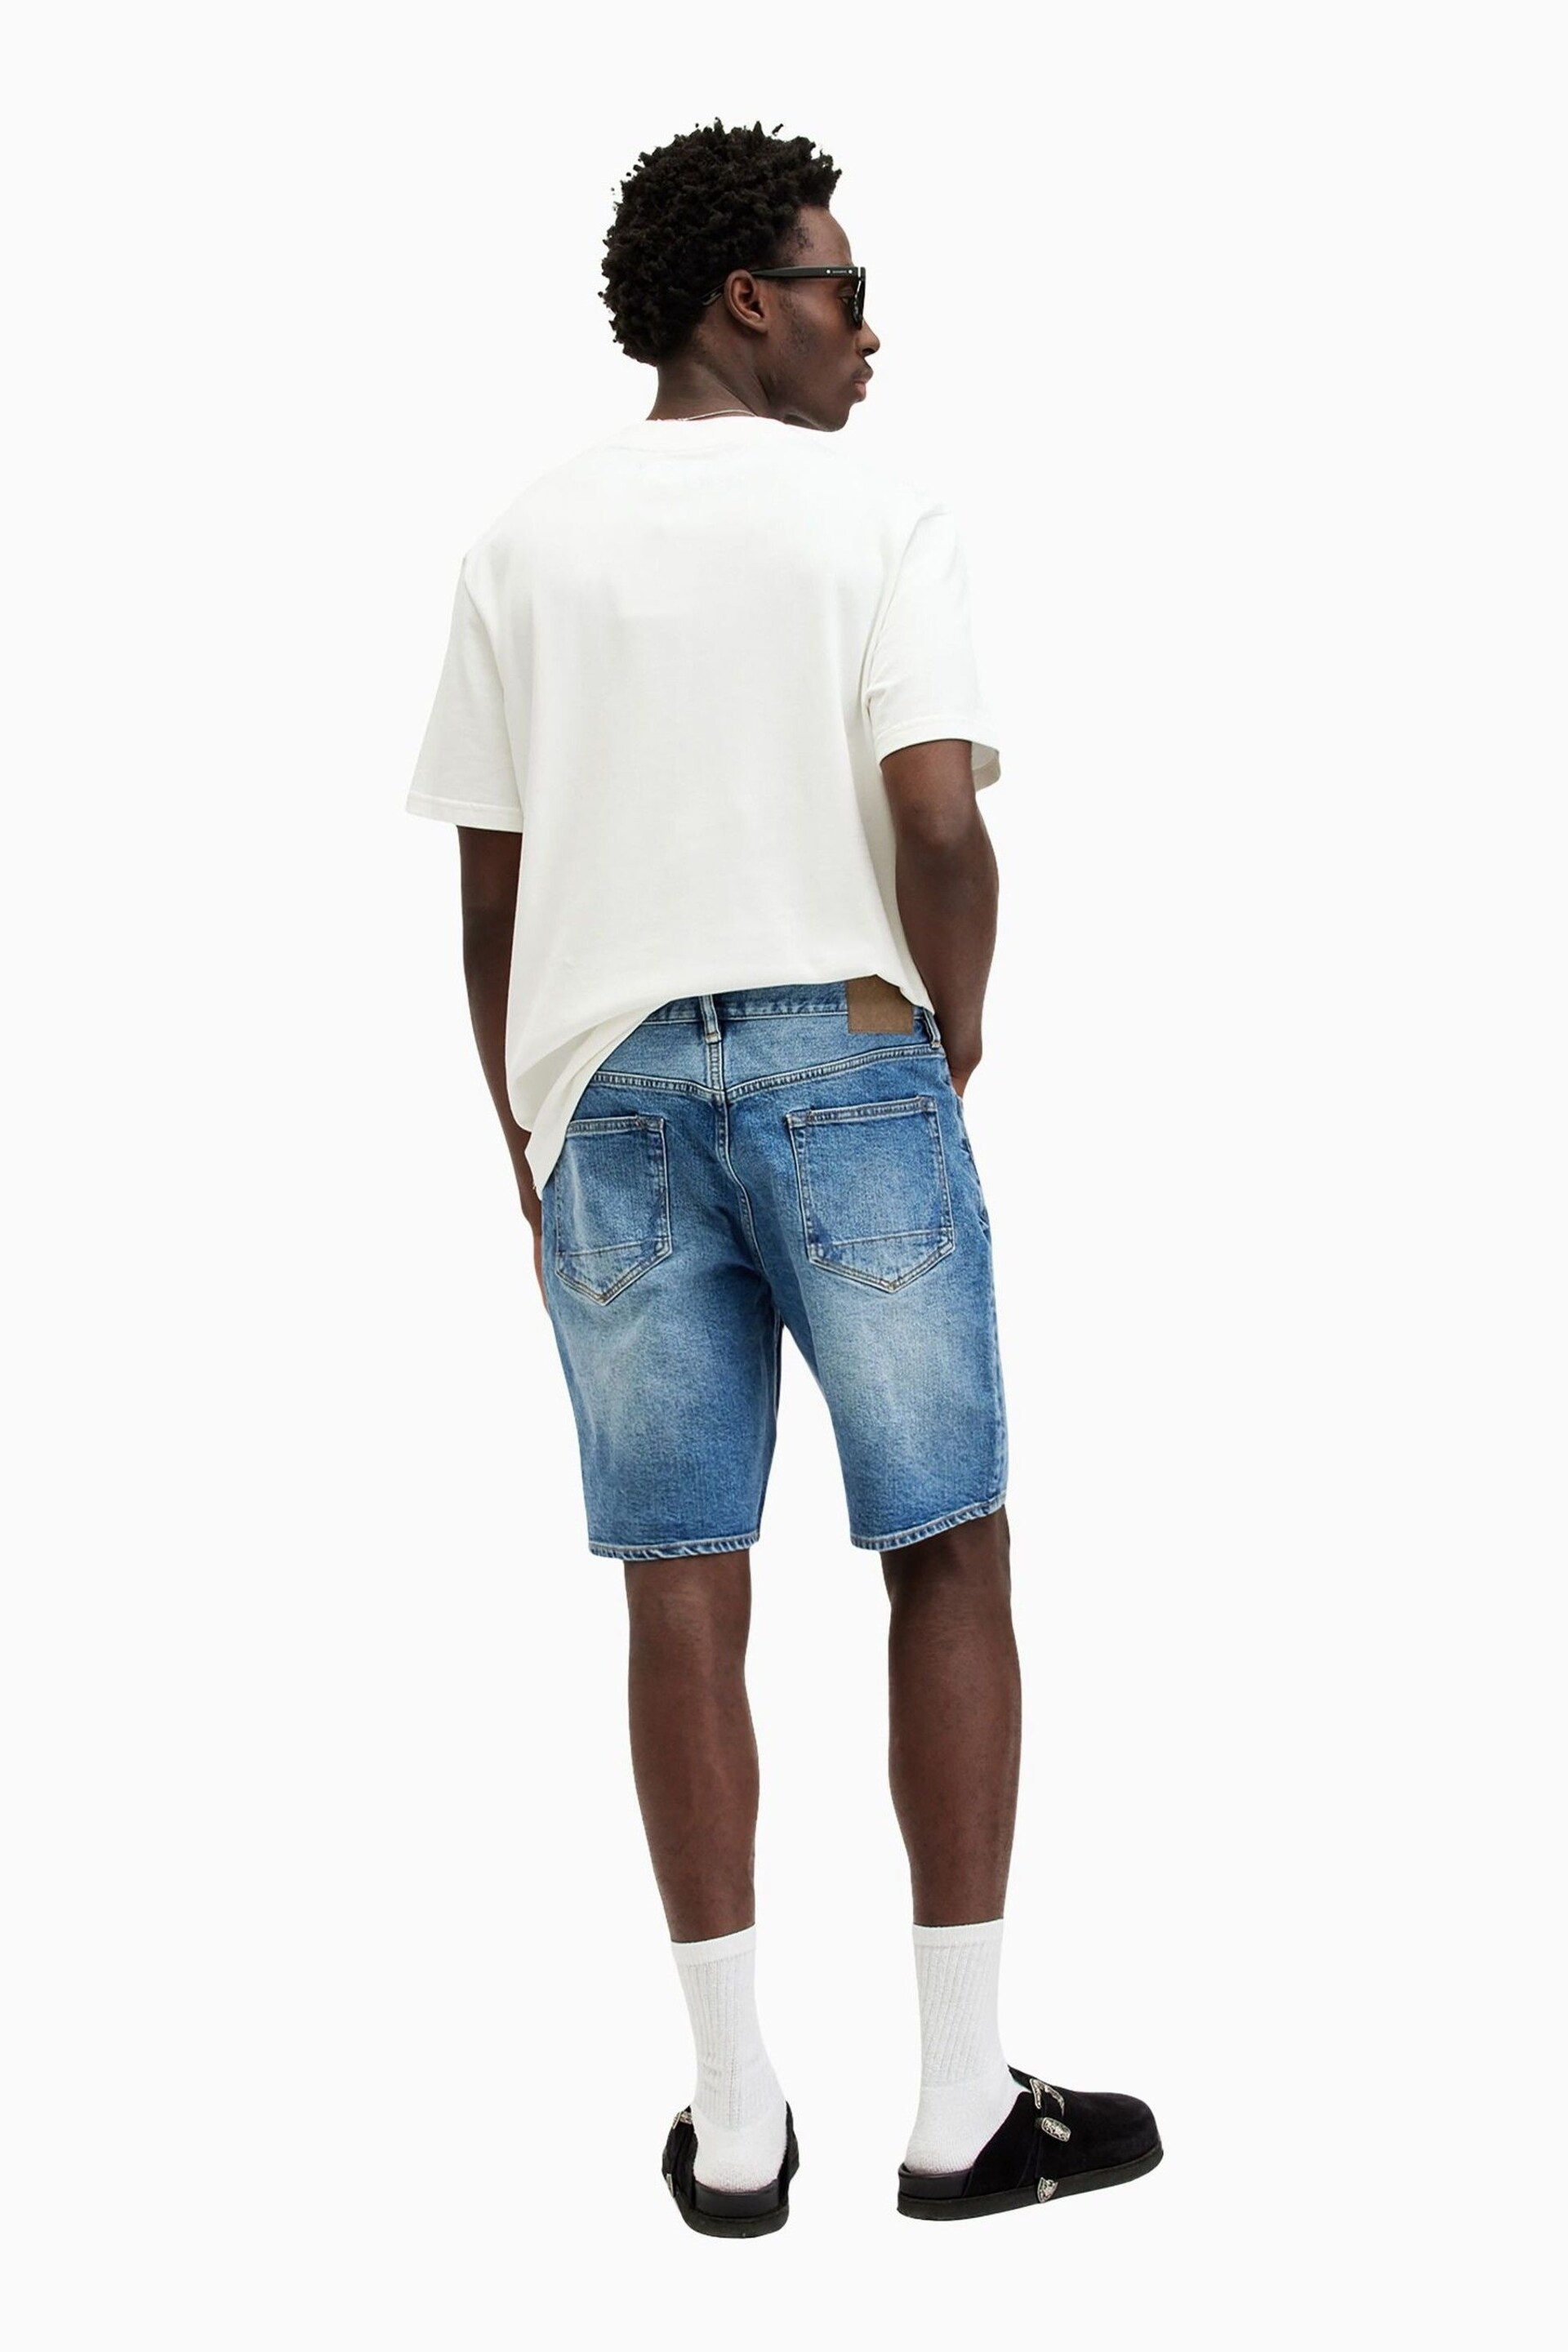 AllSaints Blue Switch Shorts - Image 8 of 9